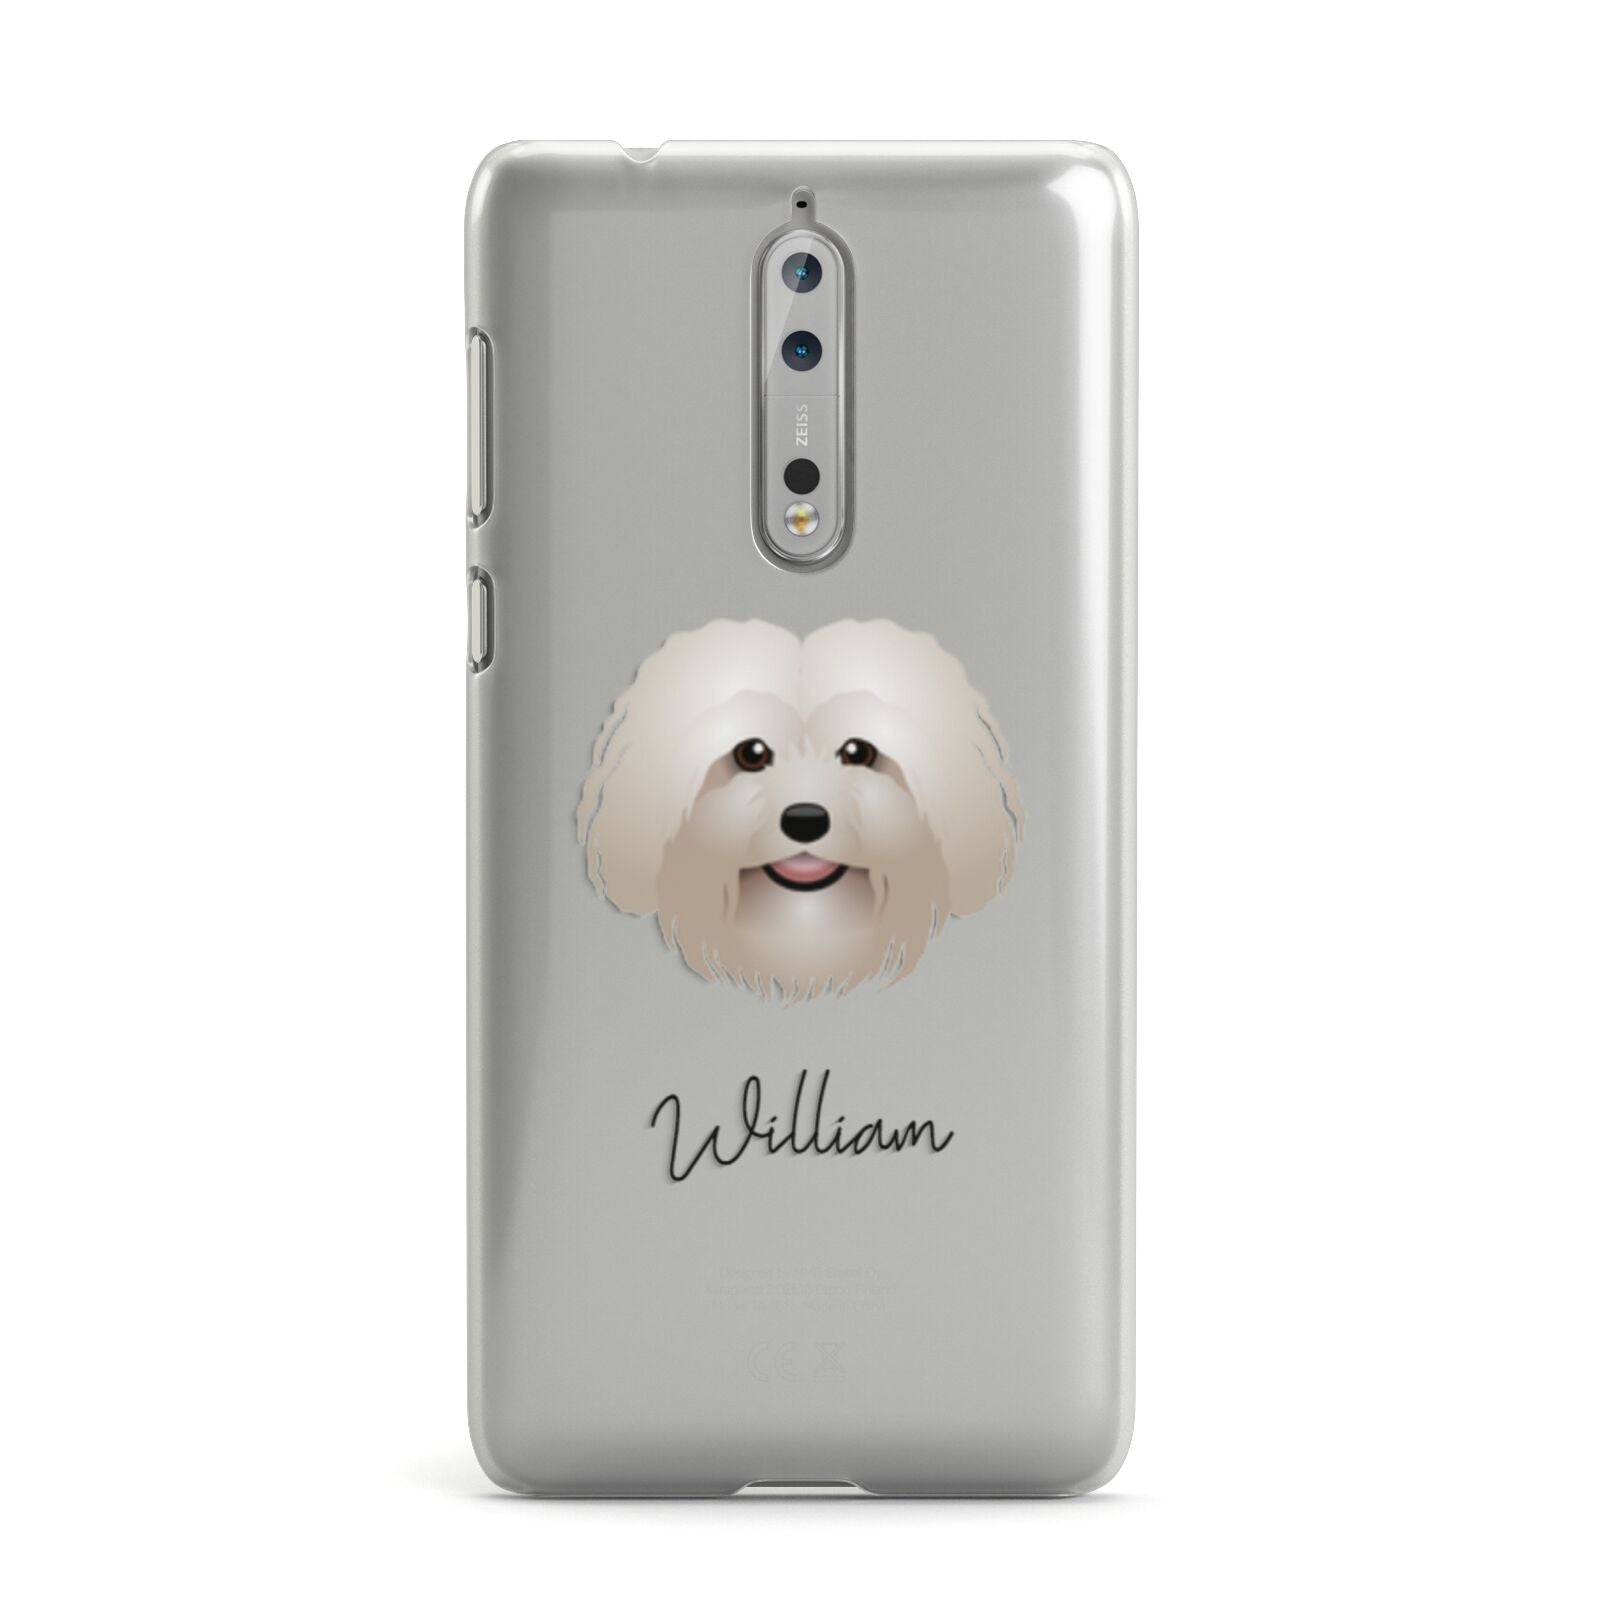 Bolognese Personalised Nokia Case